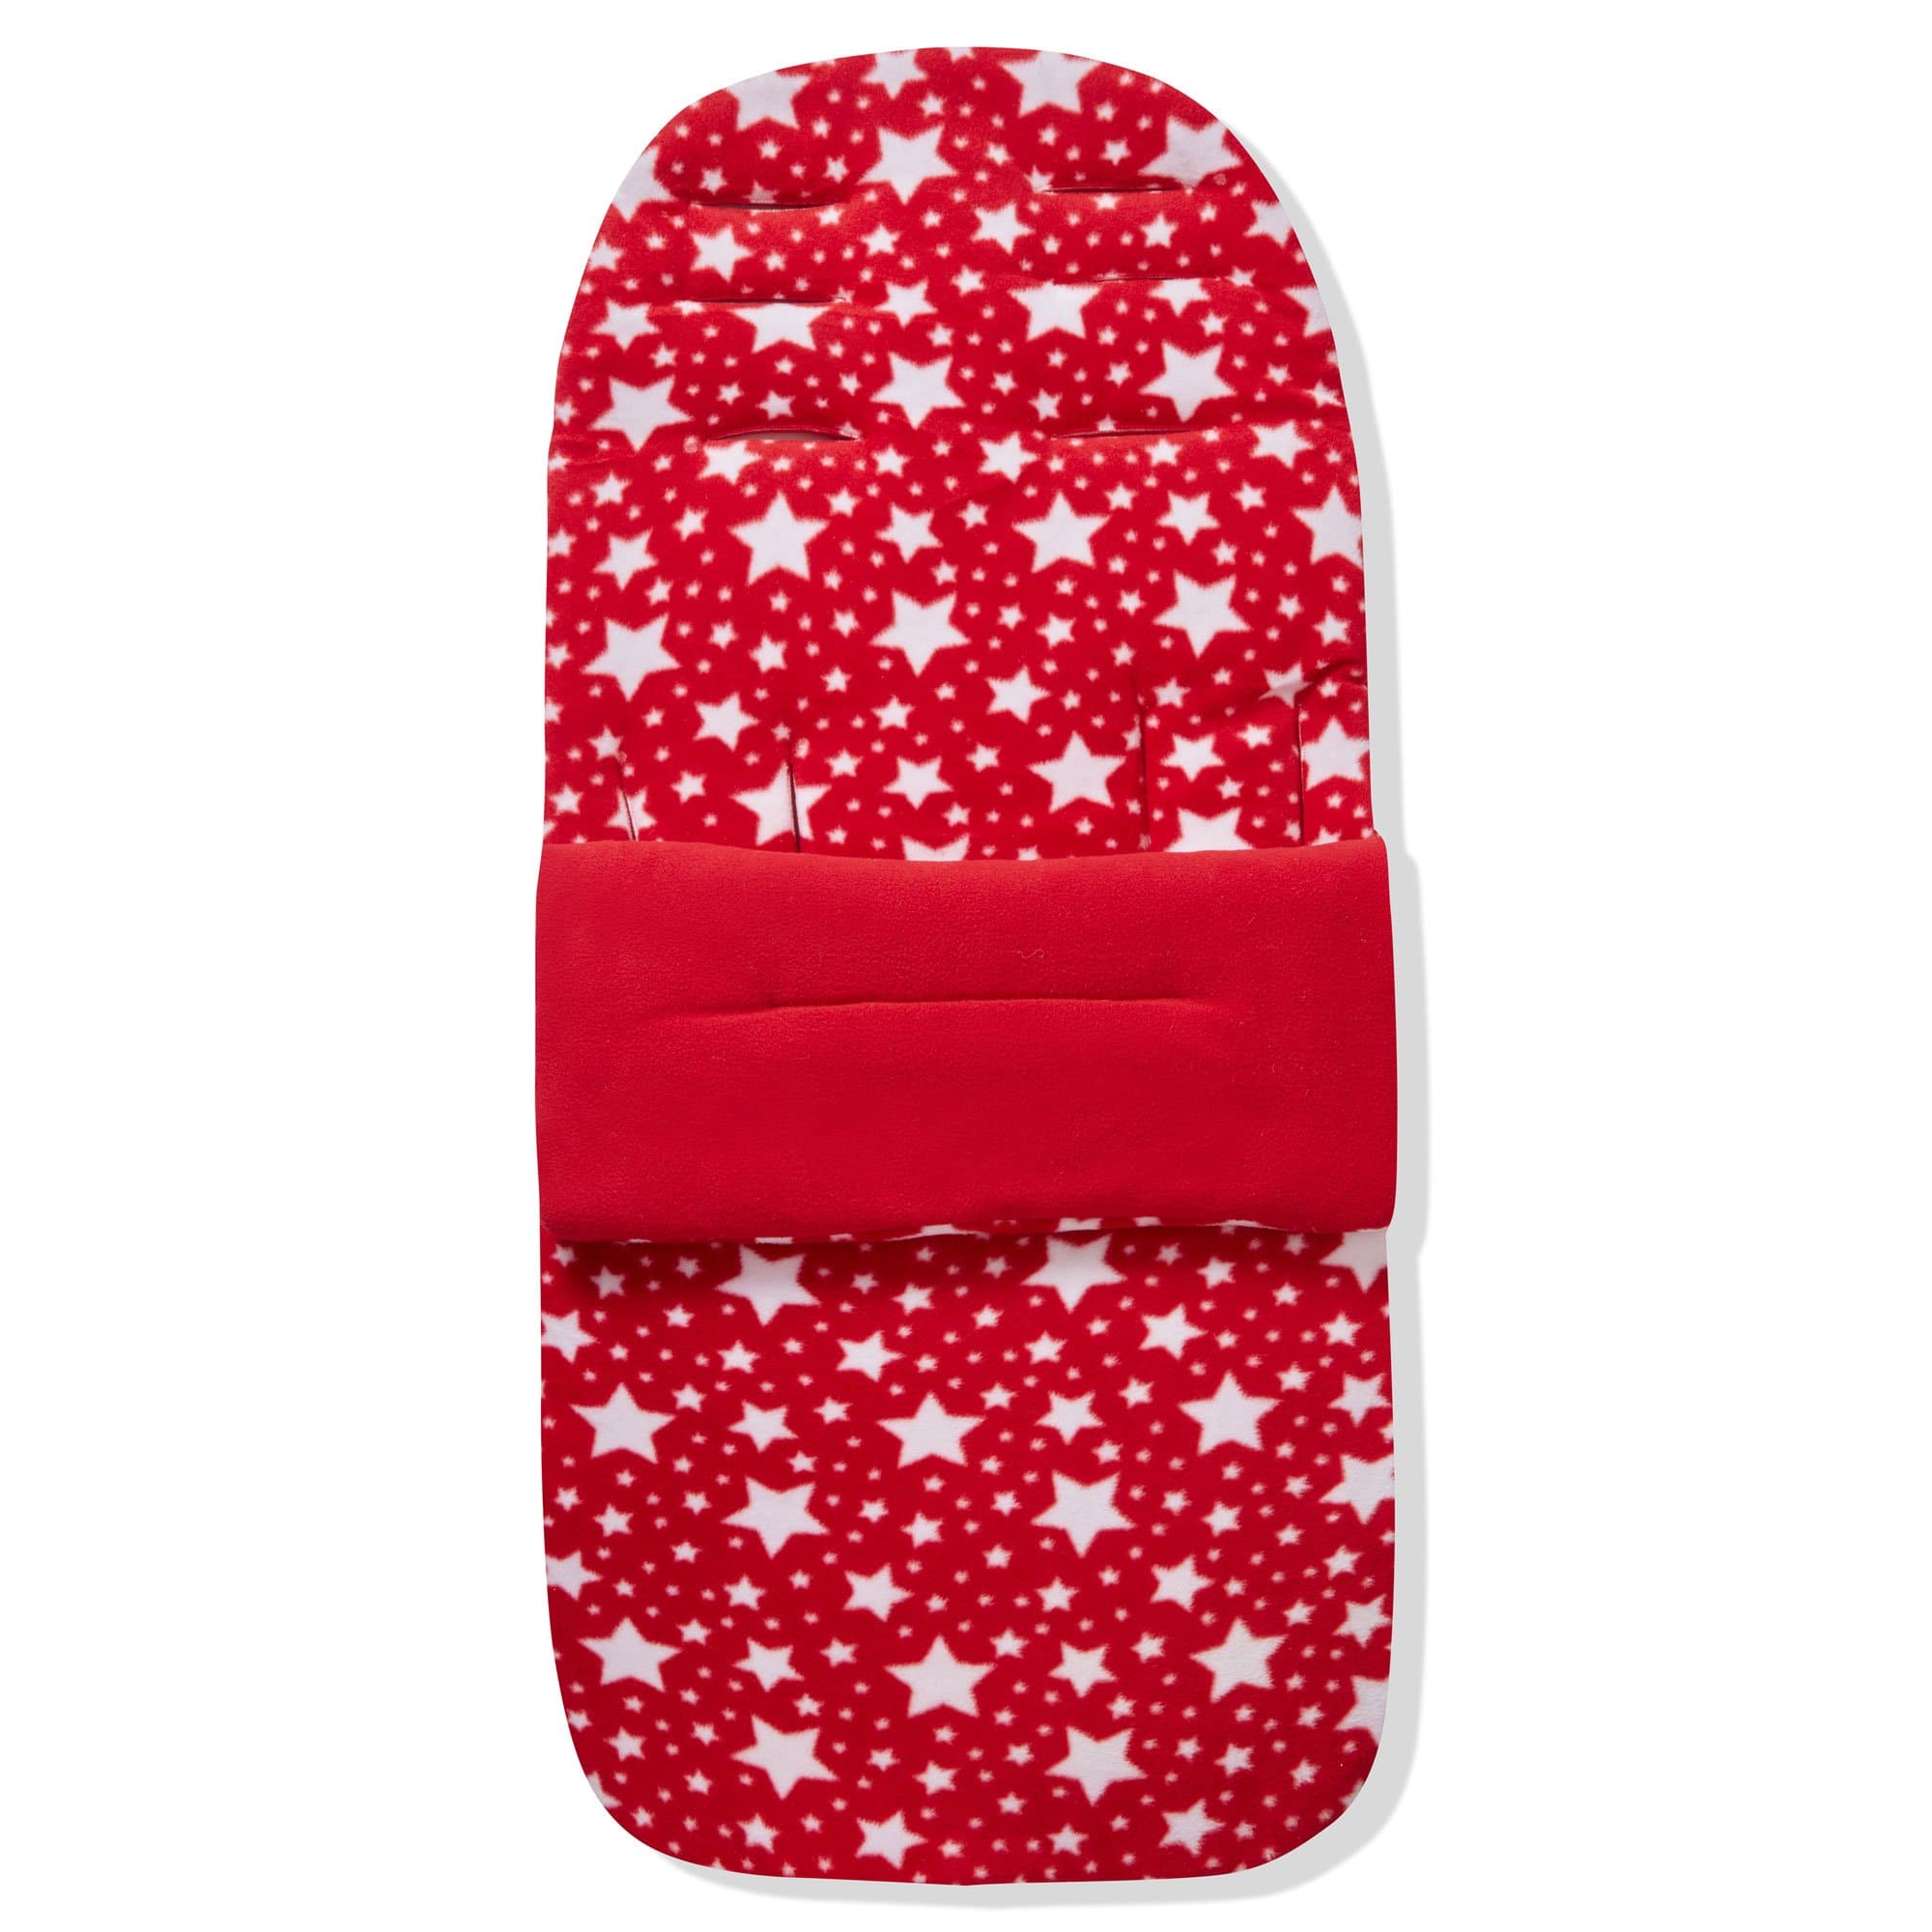 Fleece Footmuff / Cosy Toes Compatible with Phil & Teds - Red Star / Fits All Models | For Your Little One